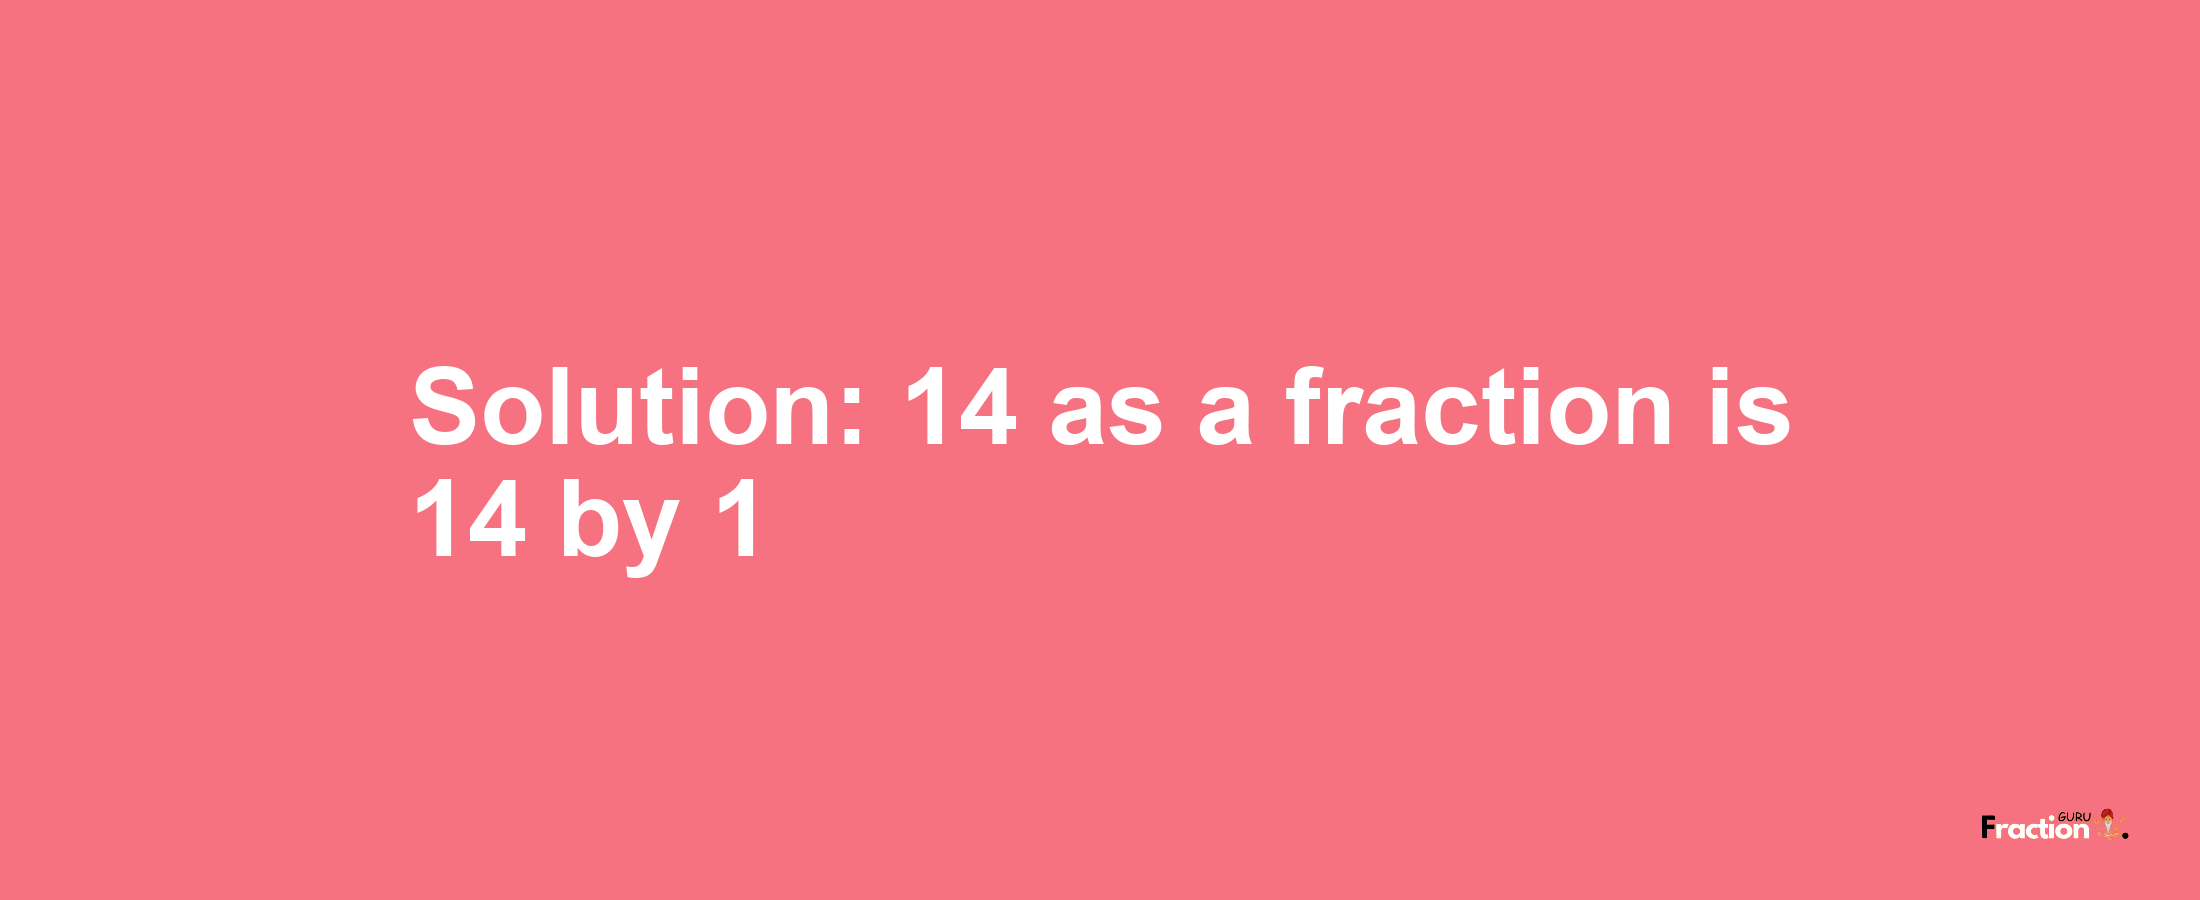 Solution:14 as a fraction is 14/1